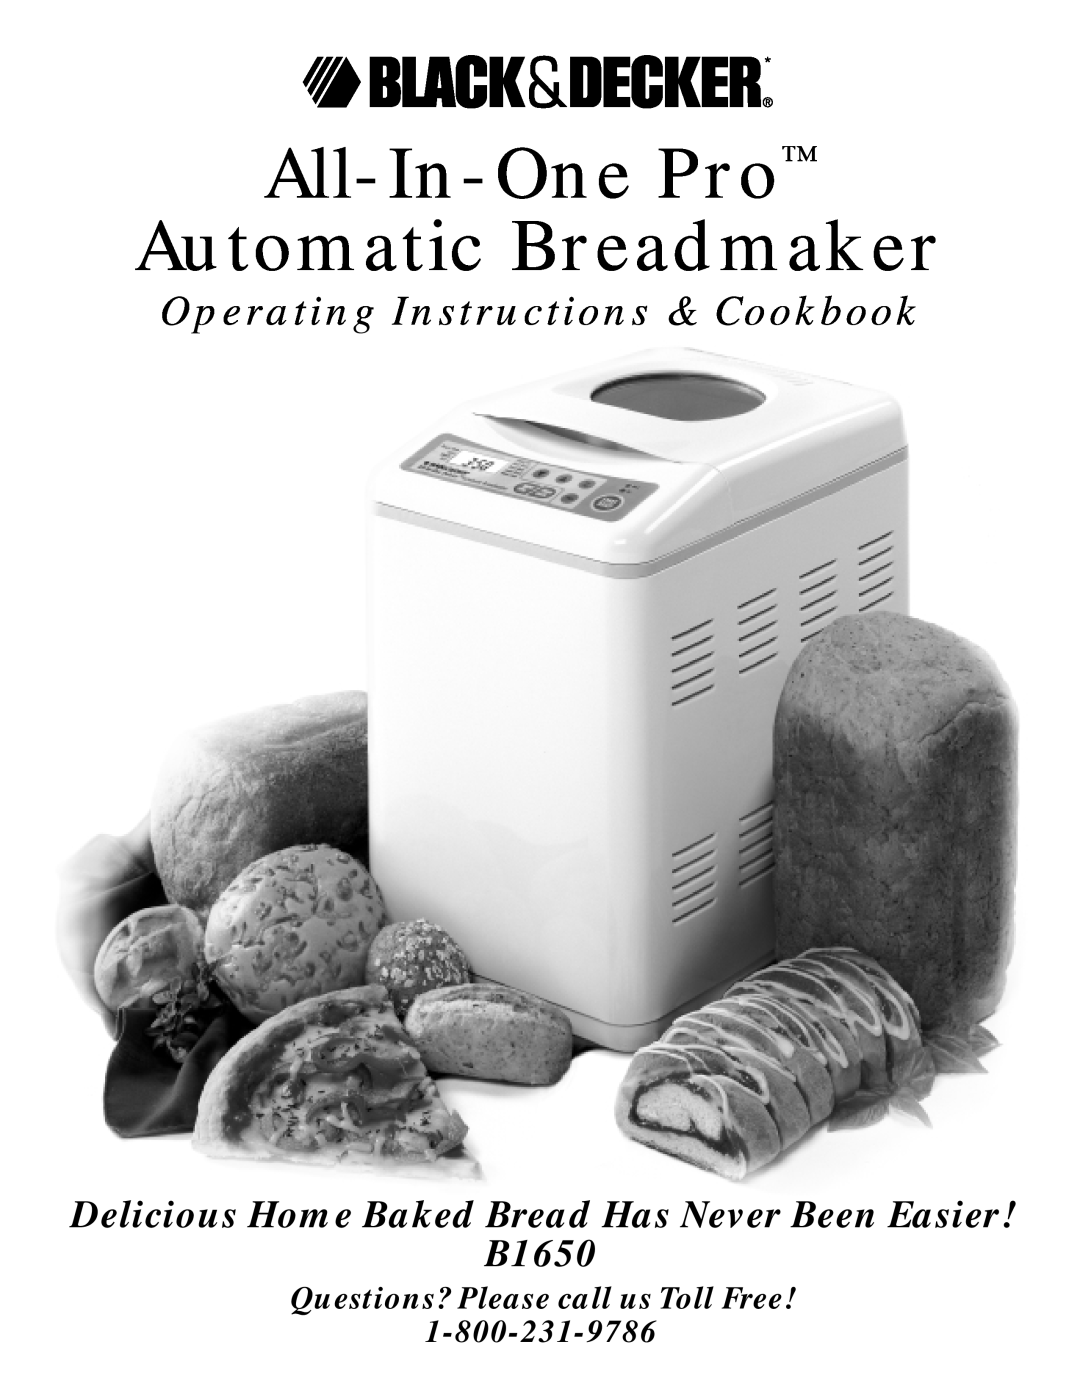 Black & Decker B1650 manual All-In-OnePro Automatic Breadmaker, Operating Instructions & Cookbook, 1-800-231-9786 